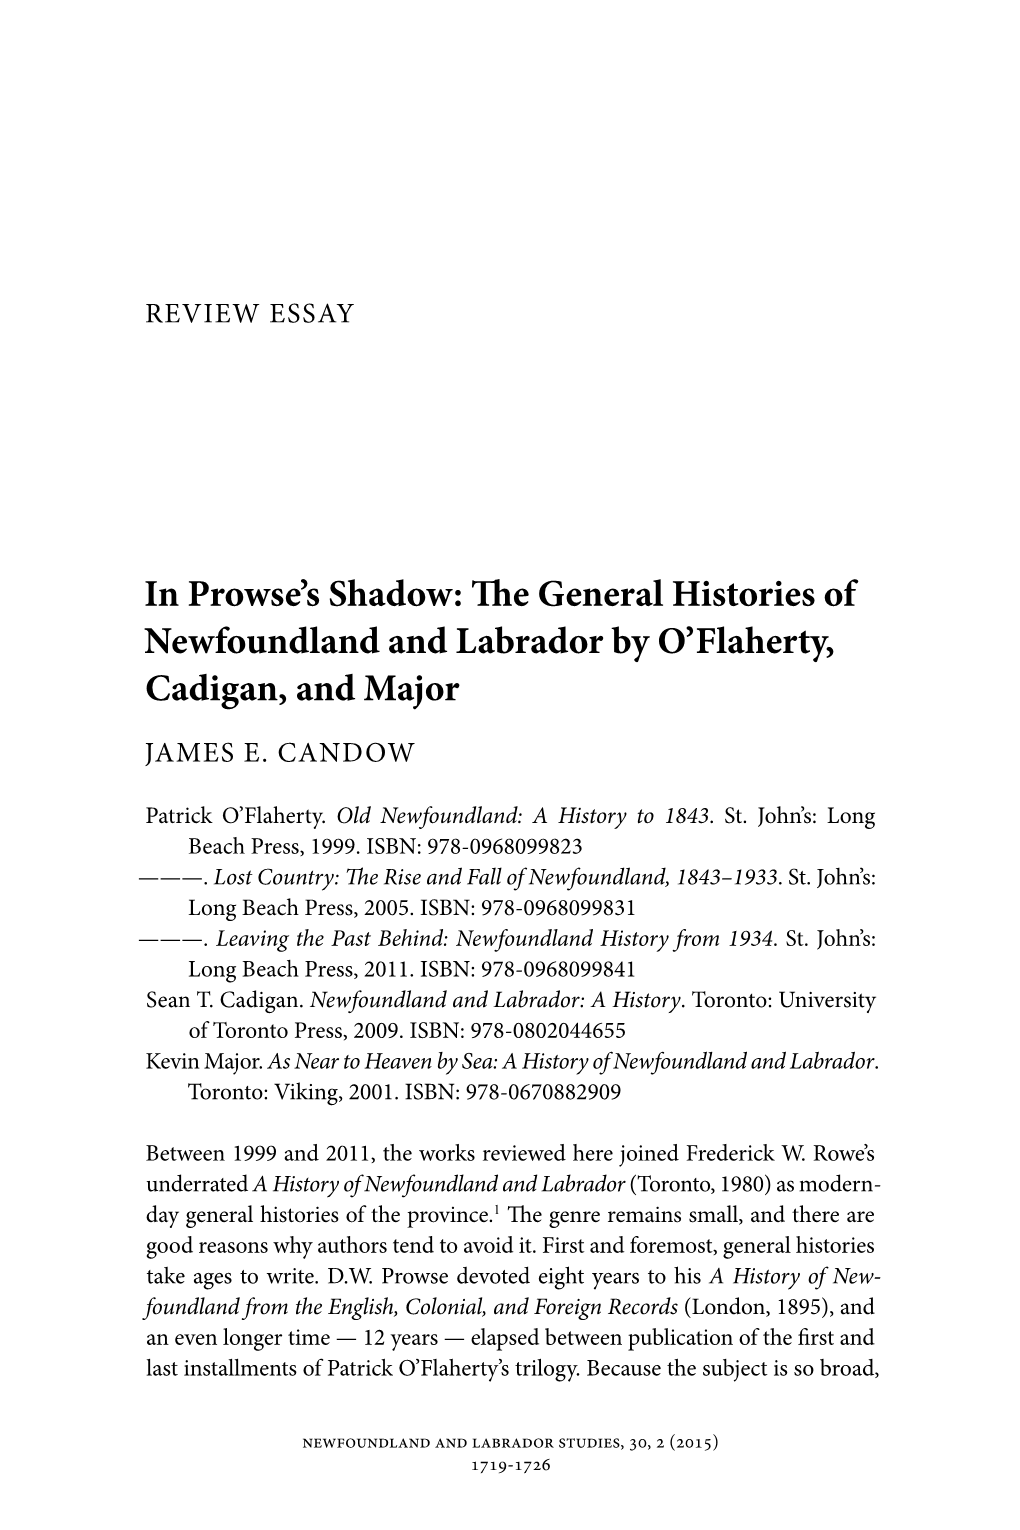 In Prowse's Shadow: the General Histories of Newfoundland and Labrador by O'flaherty, Cadigan, and Major